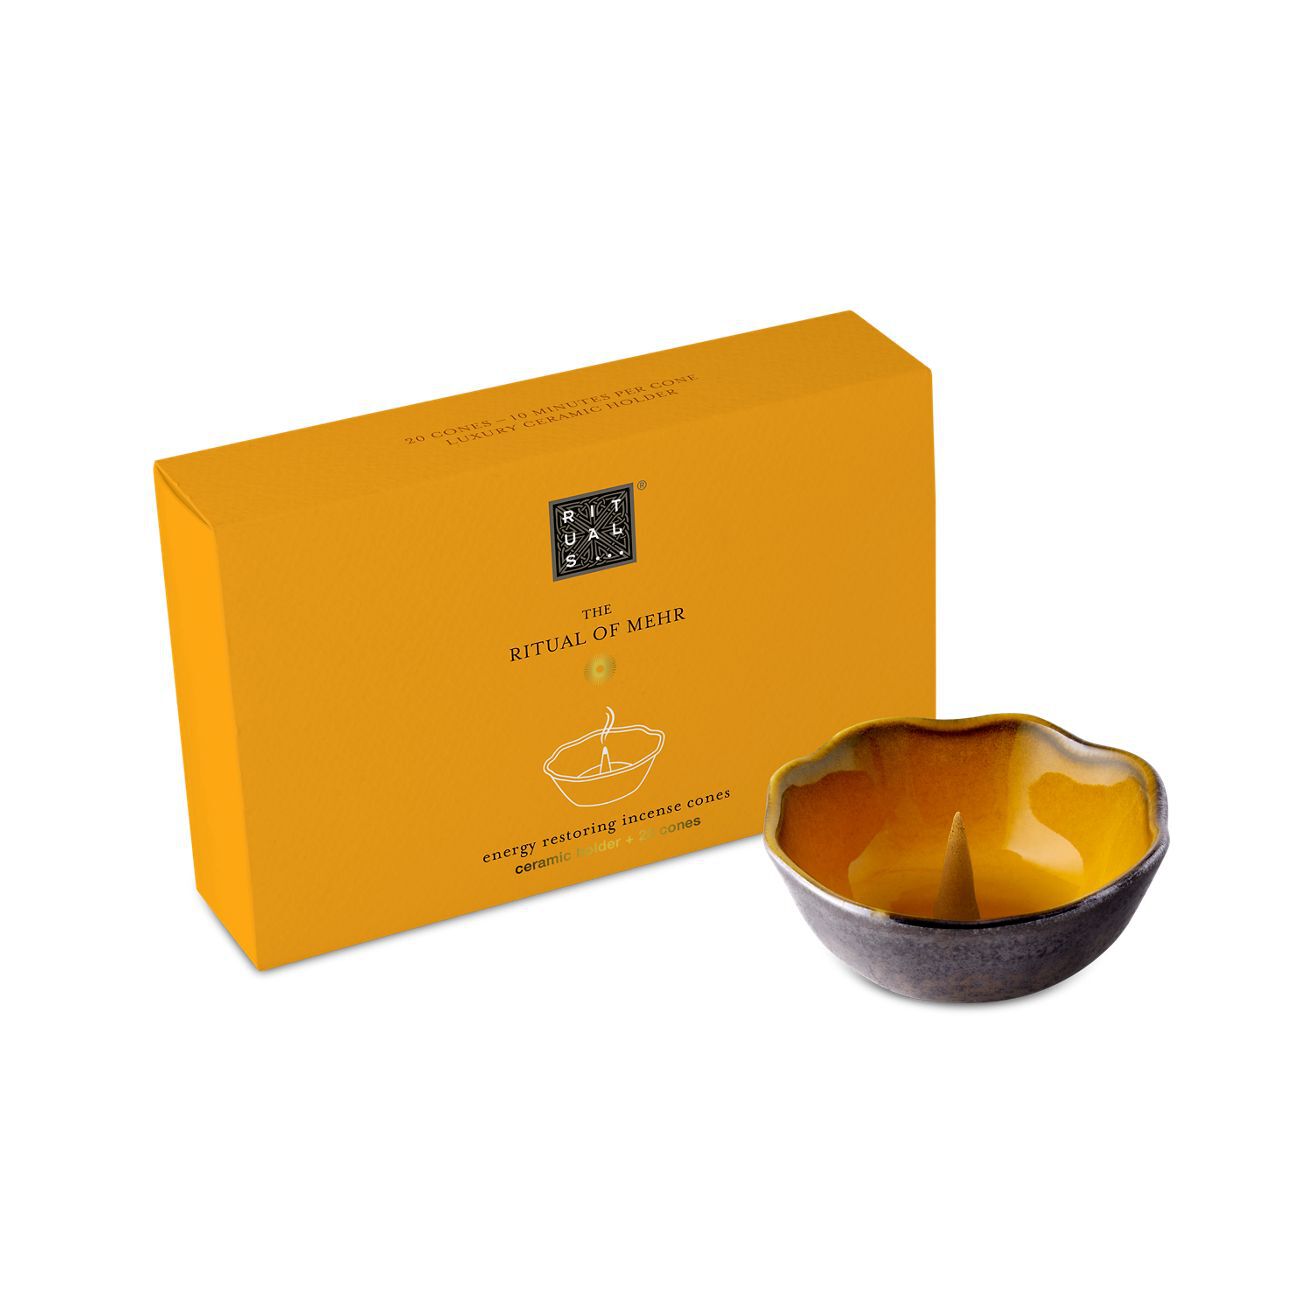 Rituals The Ritual of Mehr Incense Cones Home & Gifts